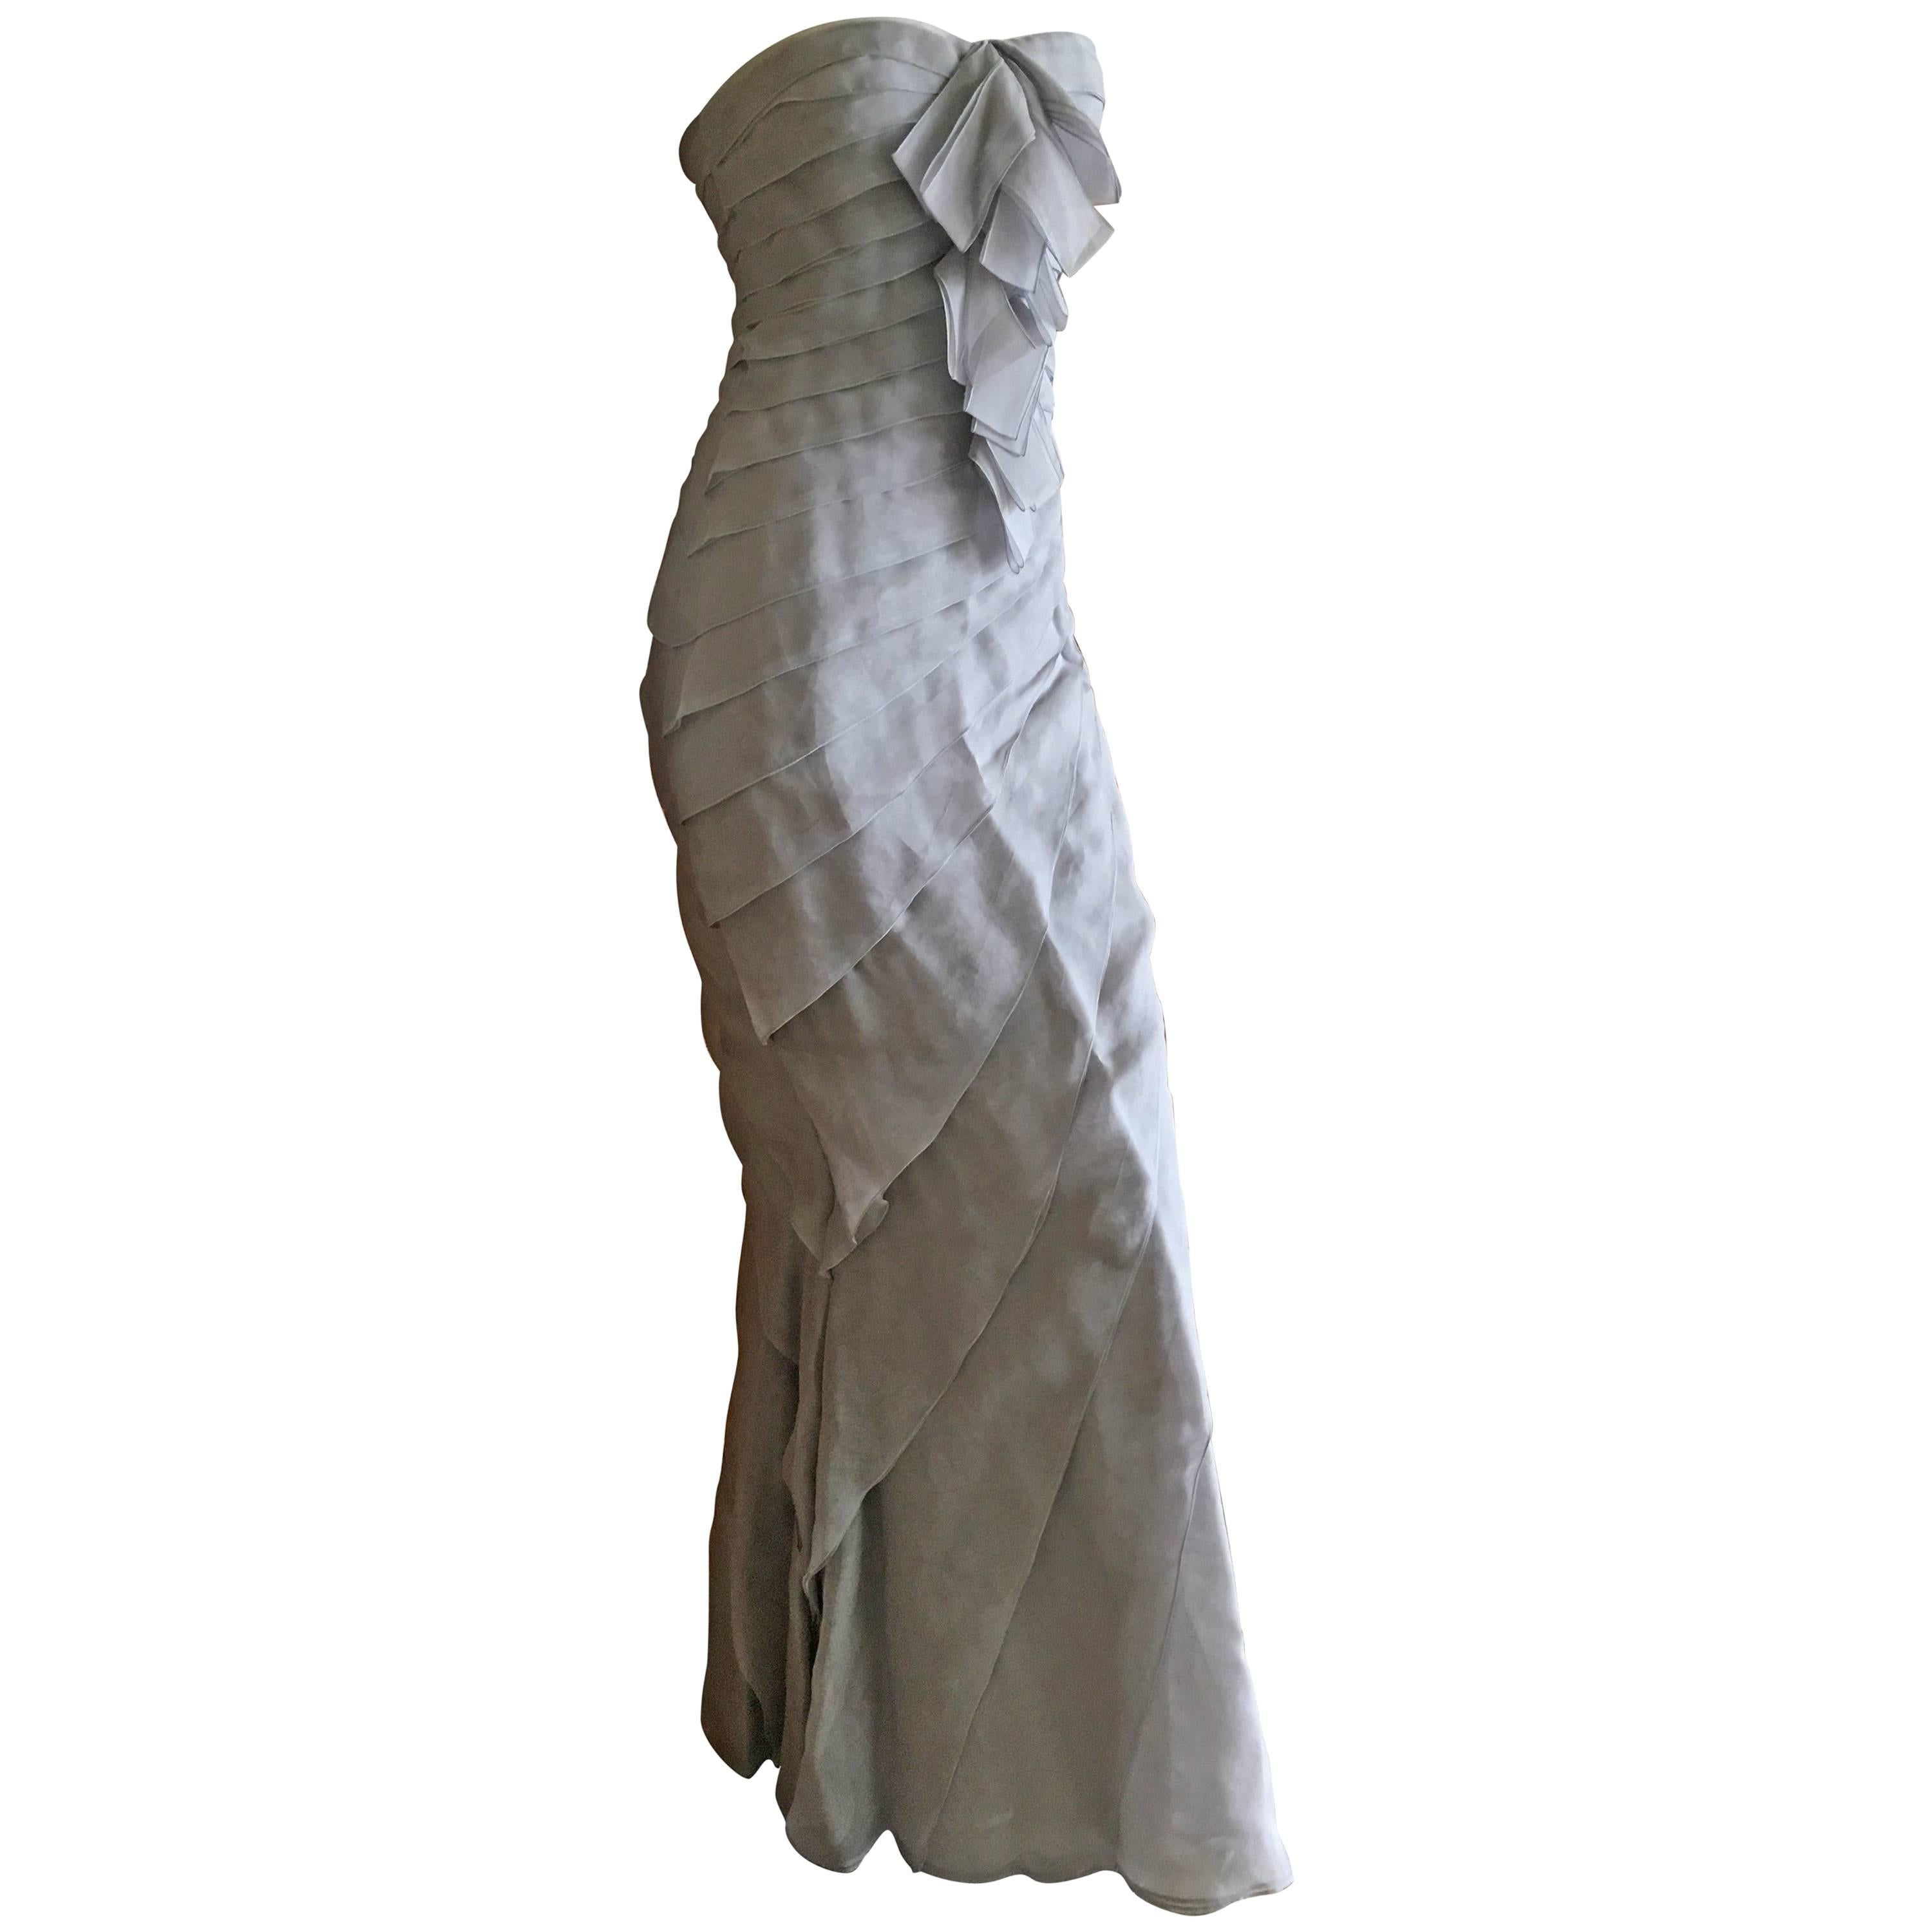  Dior by John Galliano Strapless Gray Silk Tiered Evening Dress w Inner Corset For Sale